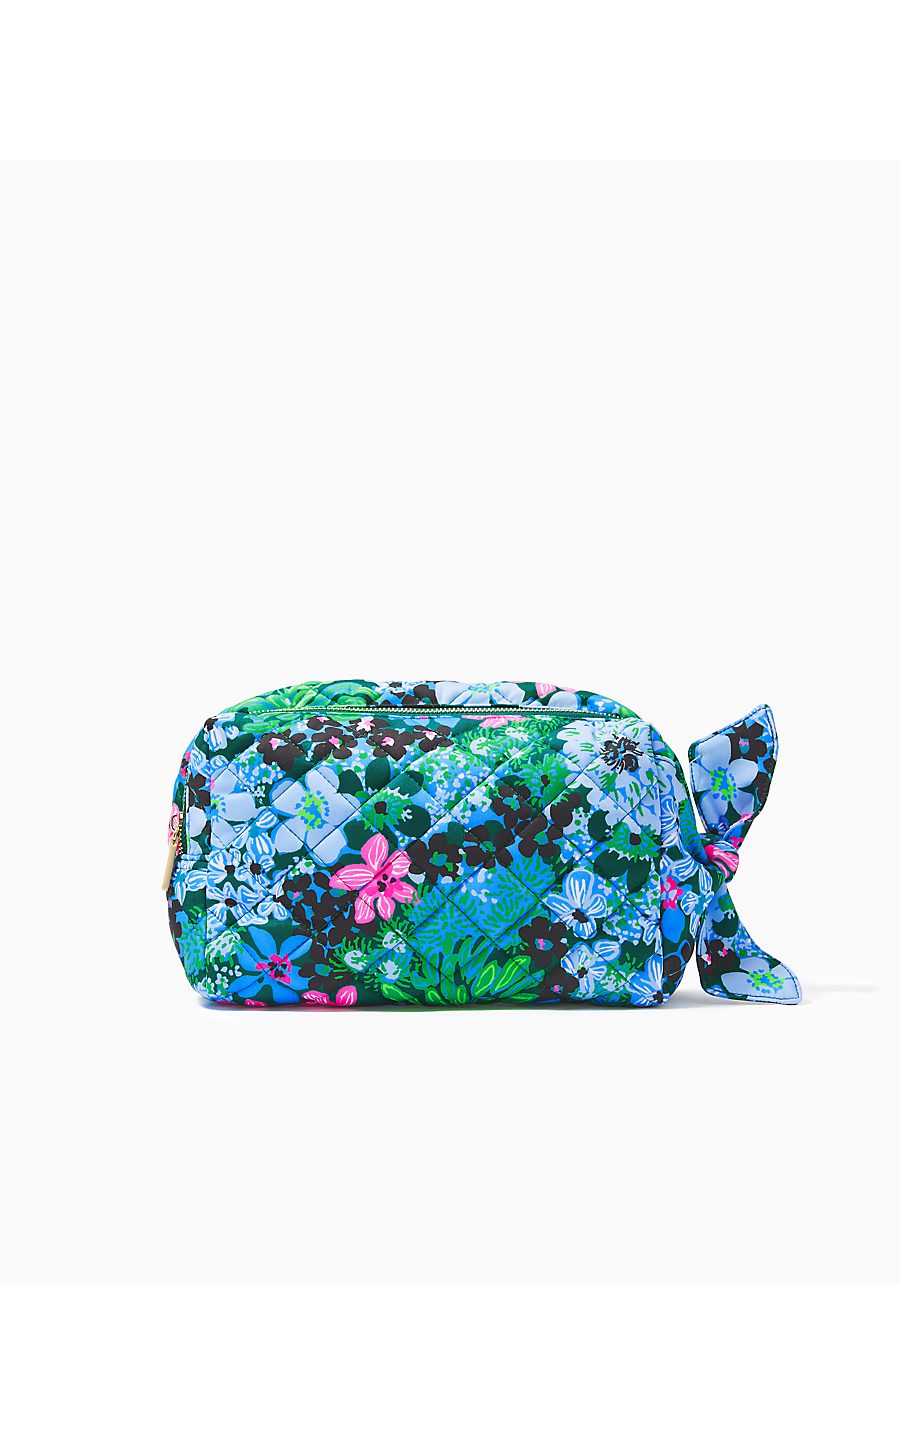 LILLY PULITZER - MARKET CARRYALL FROM SUITE VIEWS